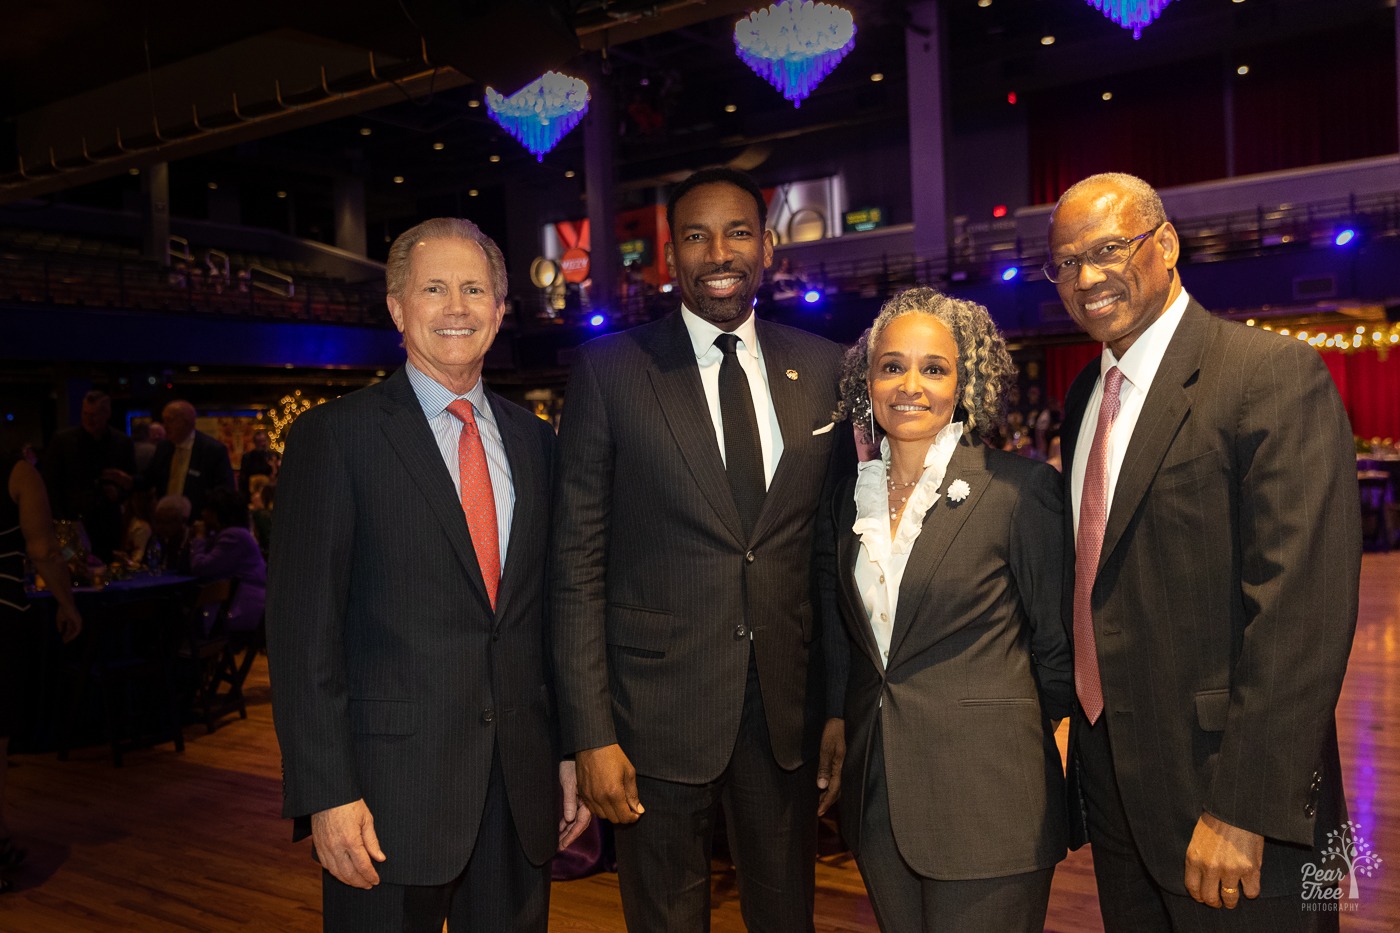 David Homrich, Atlanta Mayor Andre Dickens, Dr. Alie Redd, and Egbert Perry standing inside the Coca Cola Roxy smiling together during NOBS 2023.